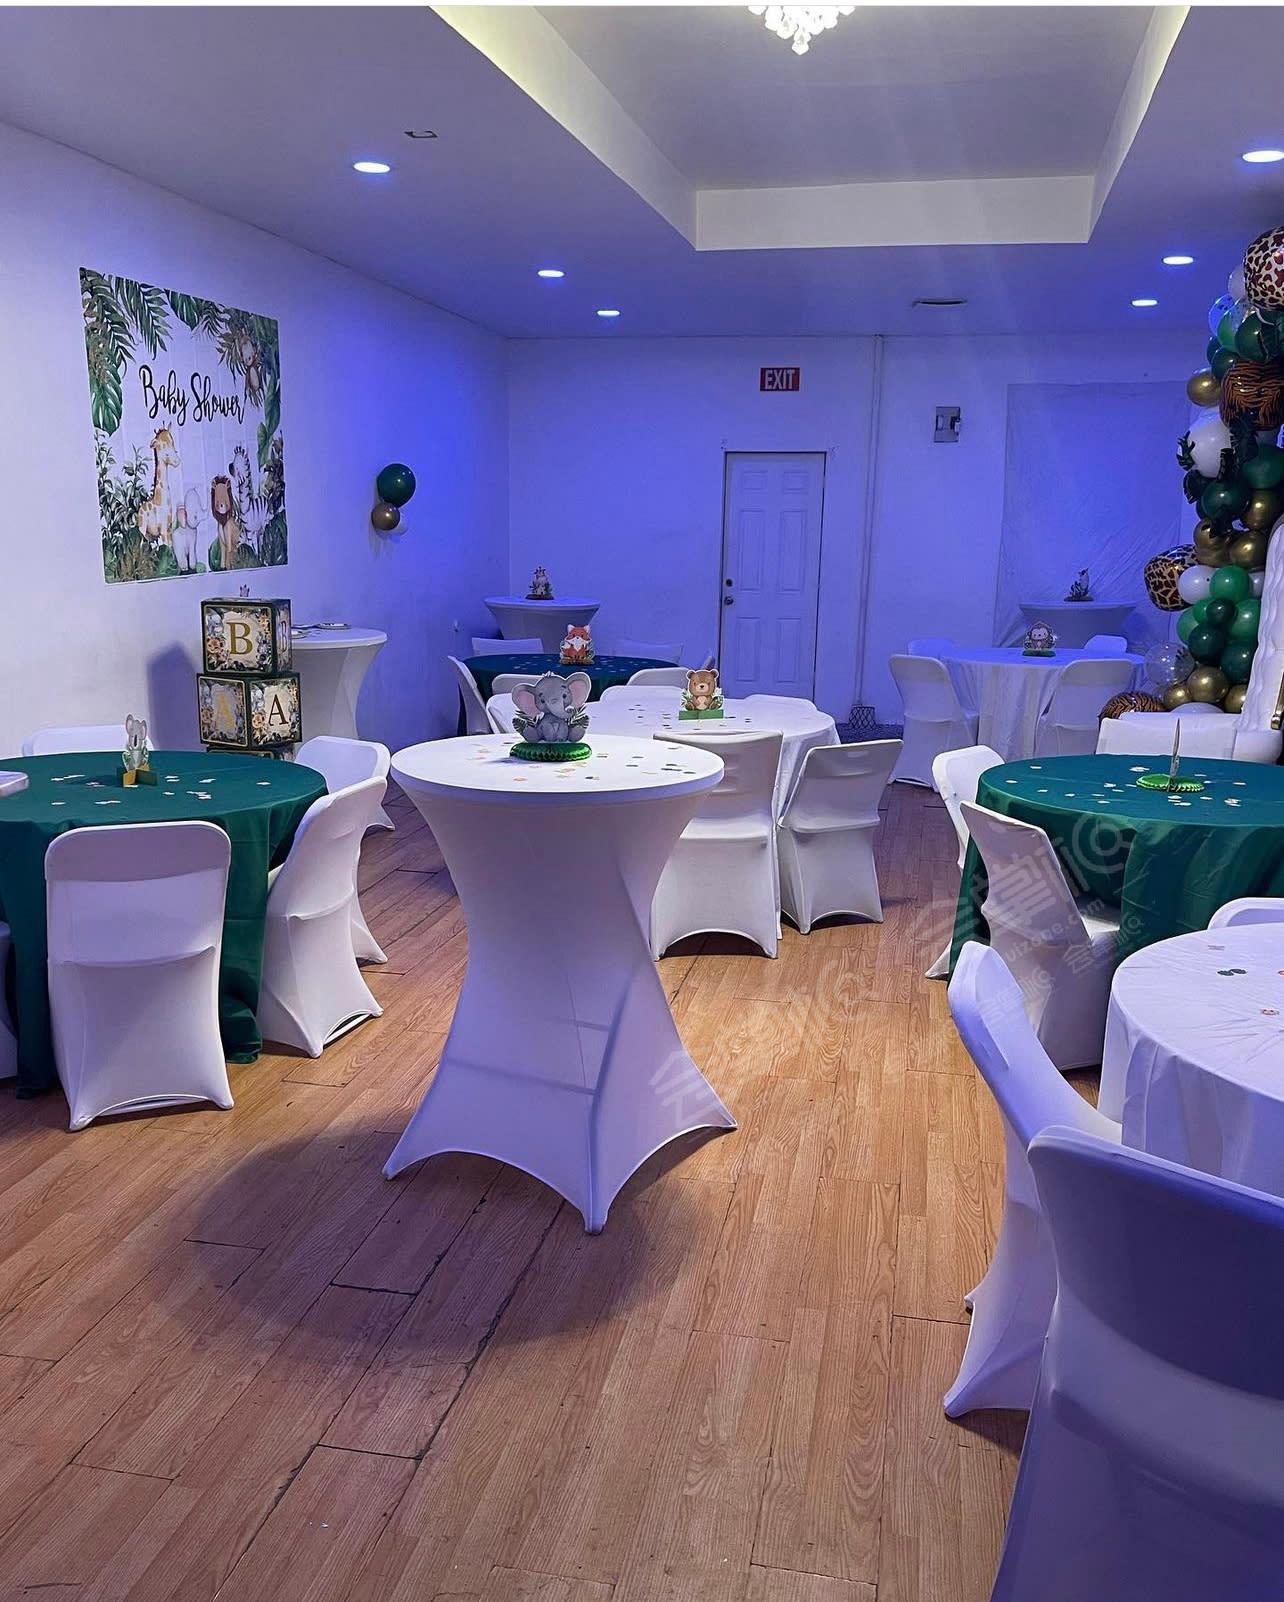 Beautiful event venue with outdoor space located in the Prospect Lefferts Garden section of Brooklyn